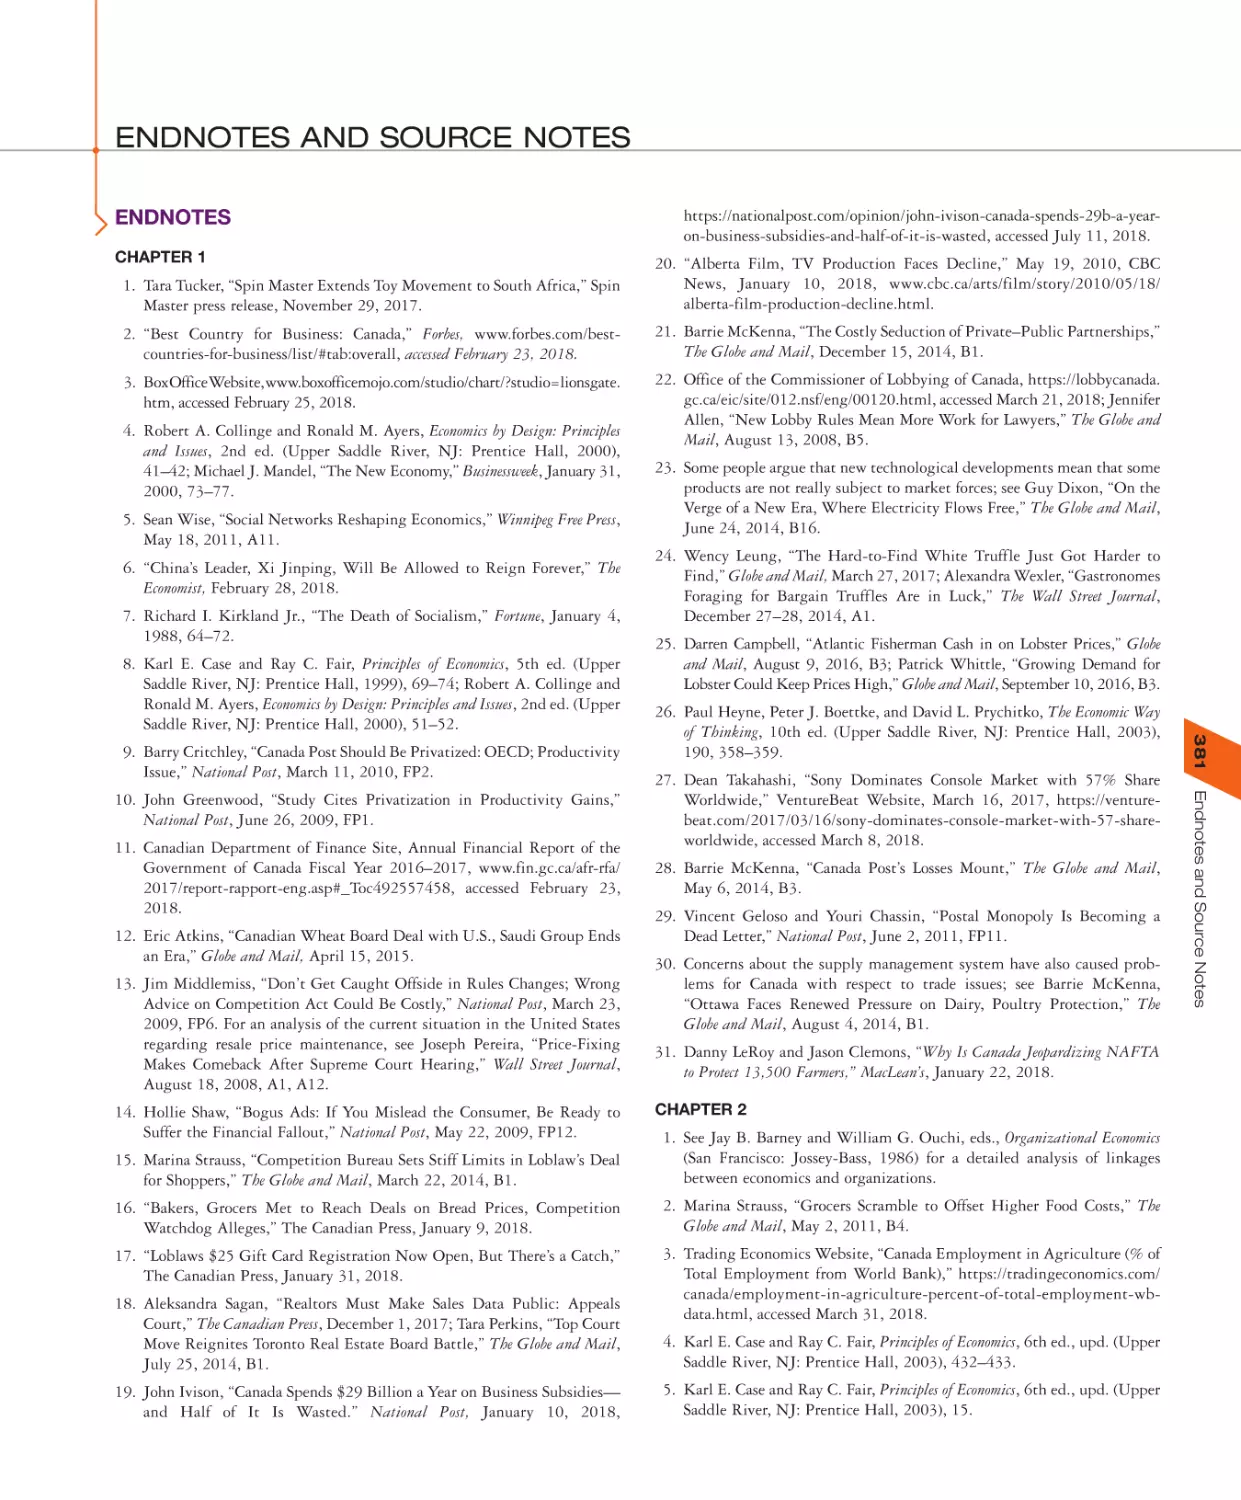 Endnotes and Source Notes